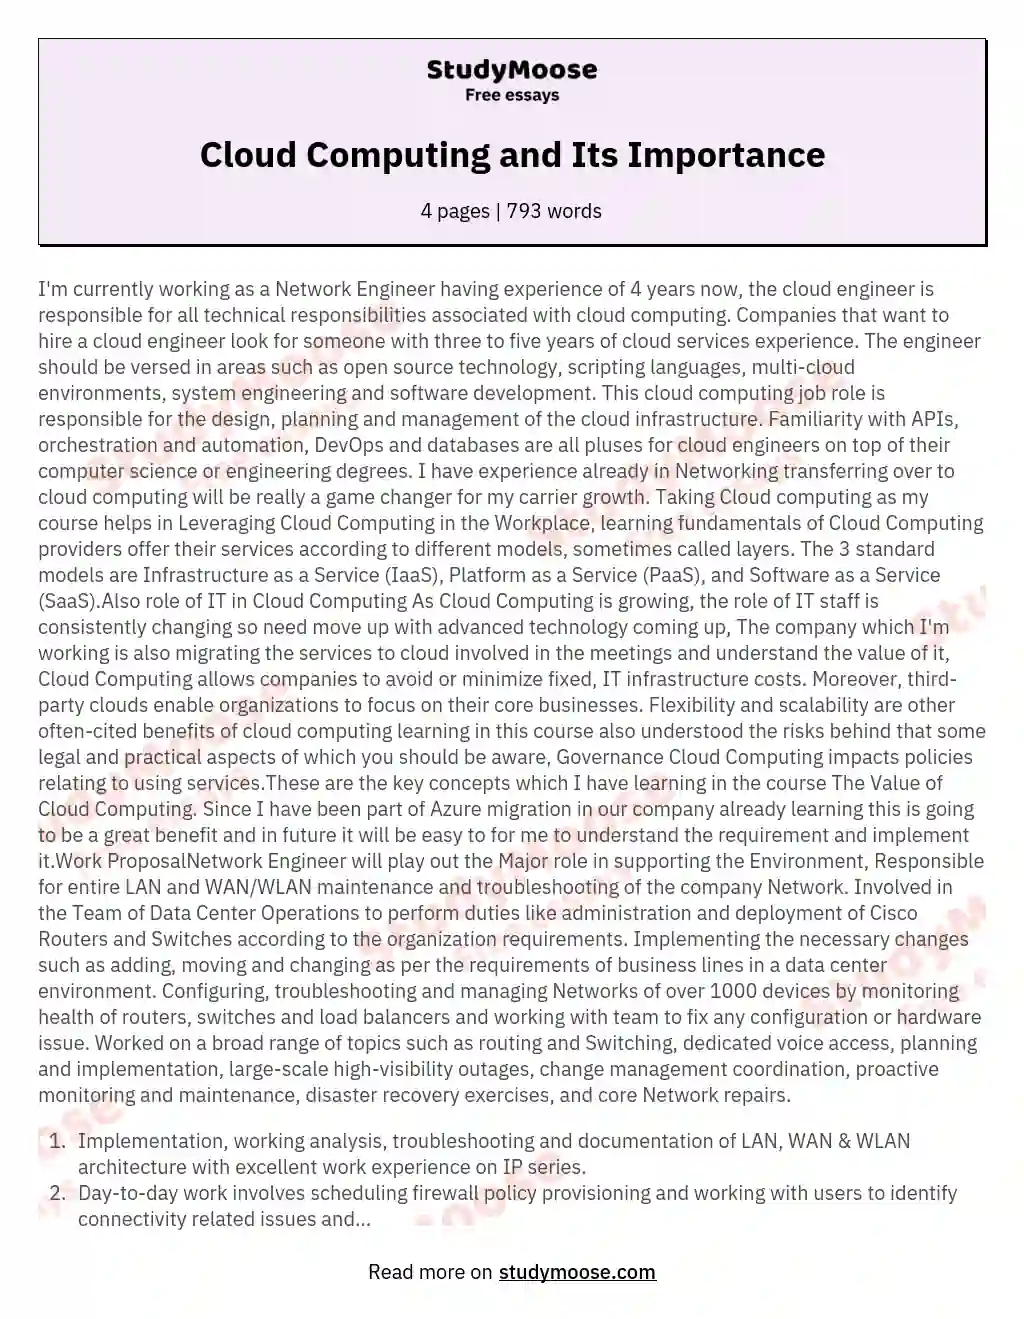 Cloud Computing and Its Importance